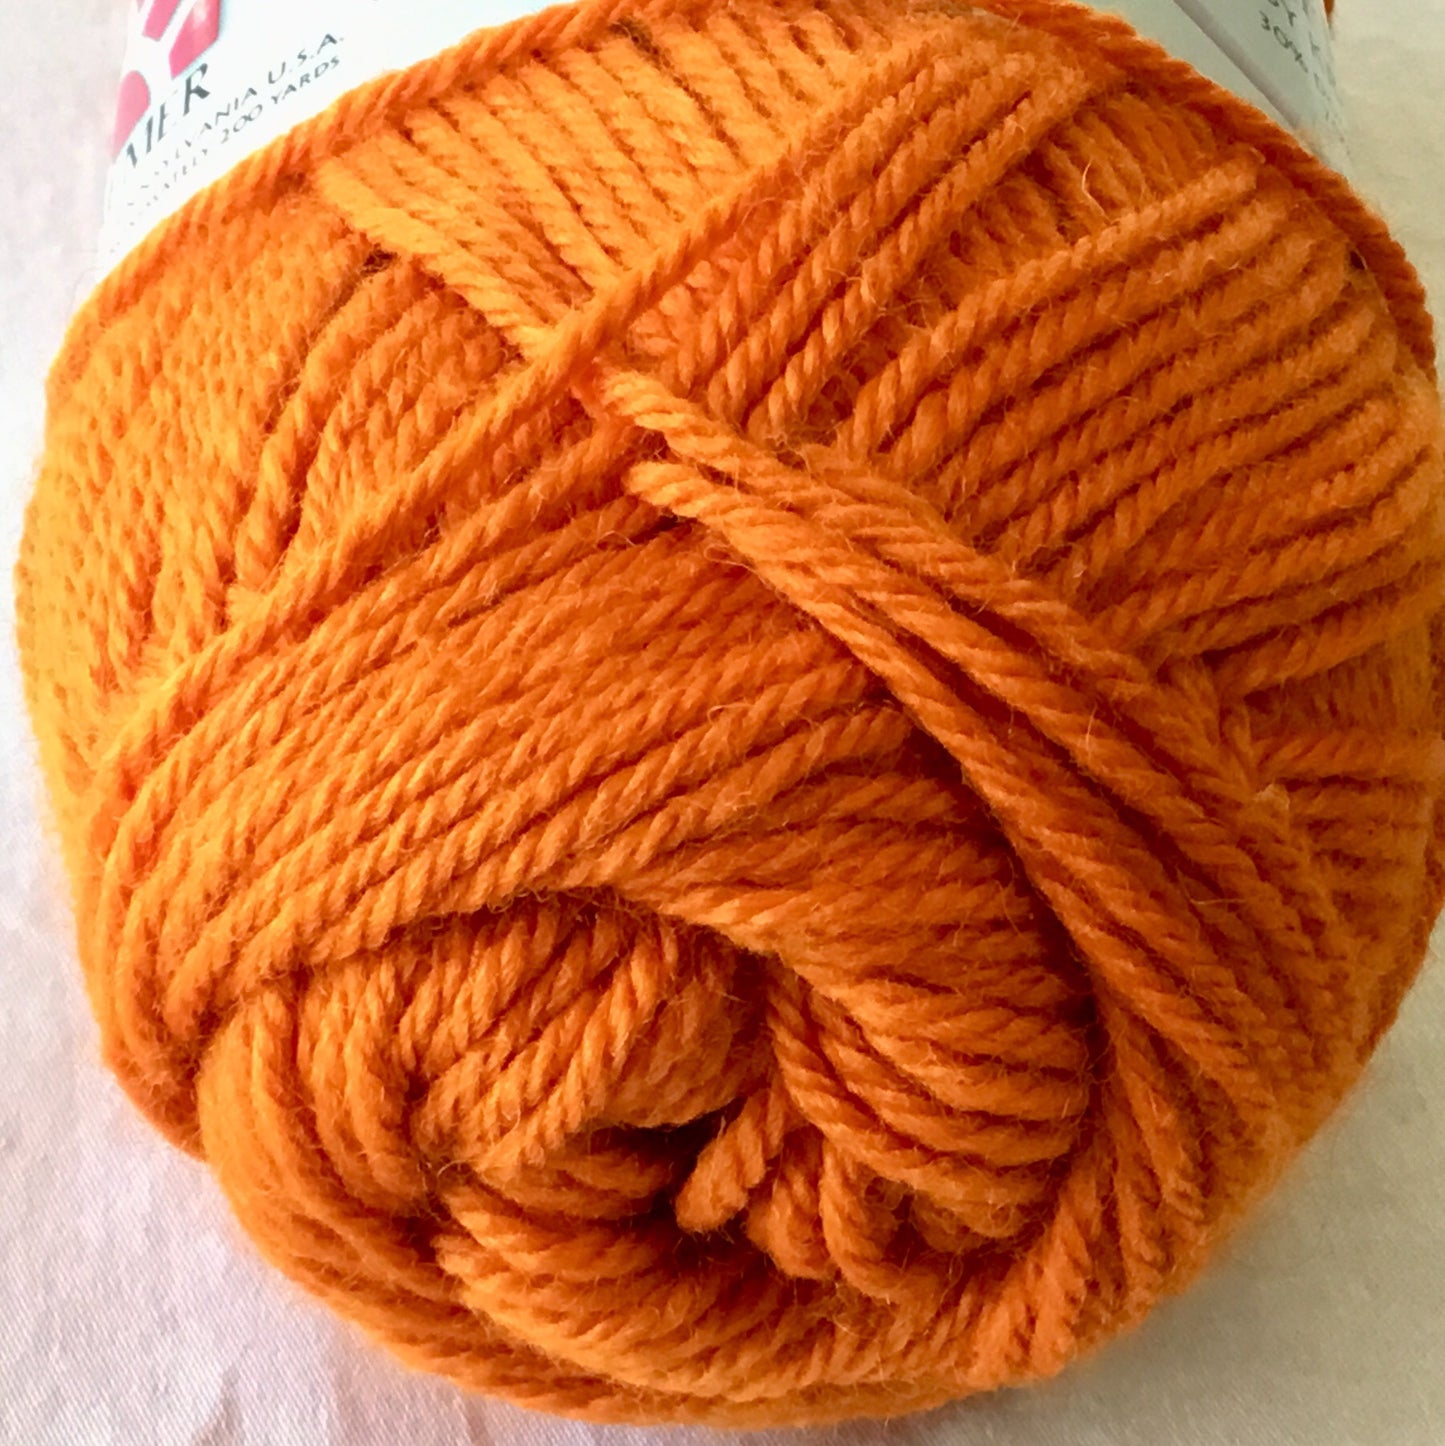 Perfection Worsted